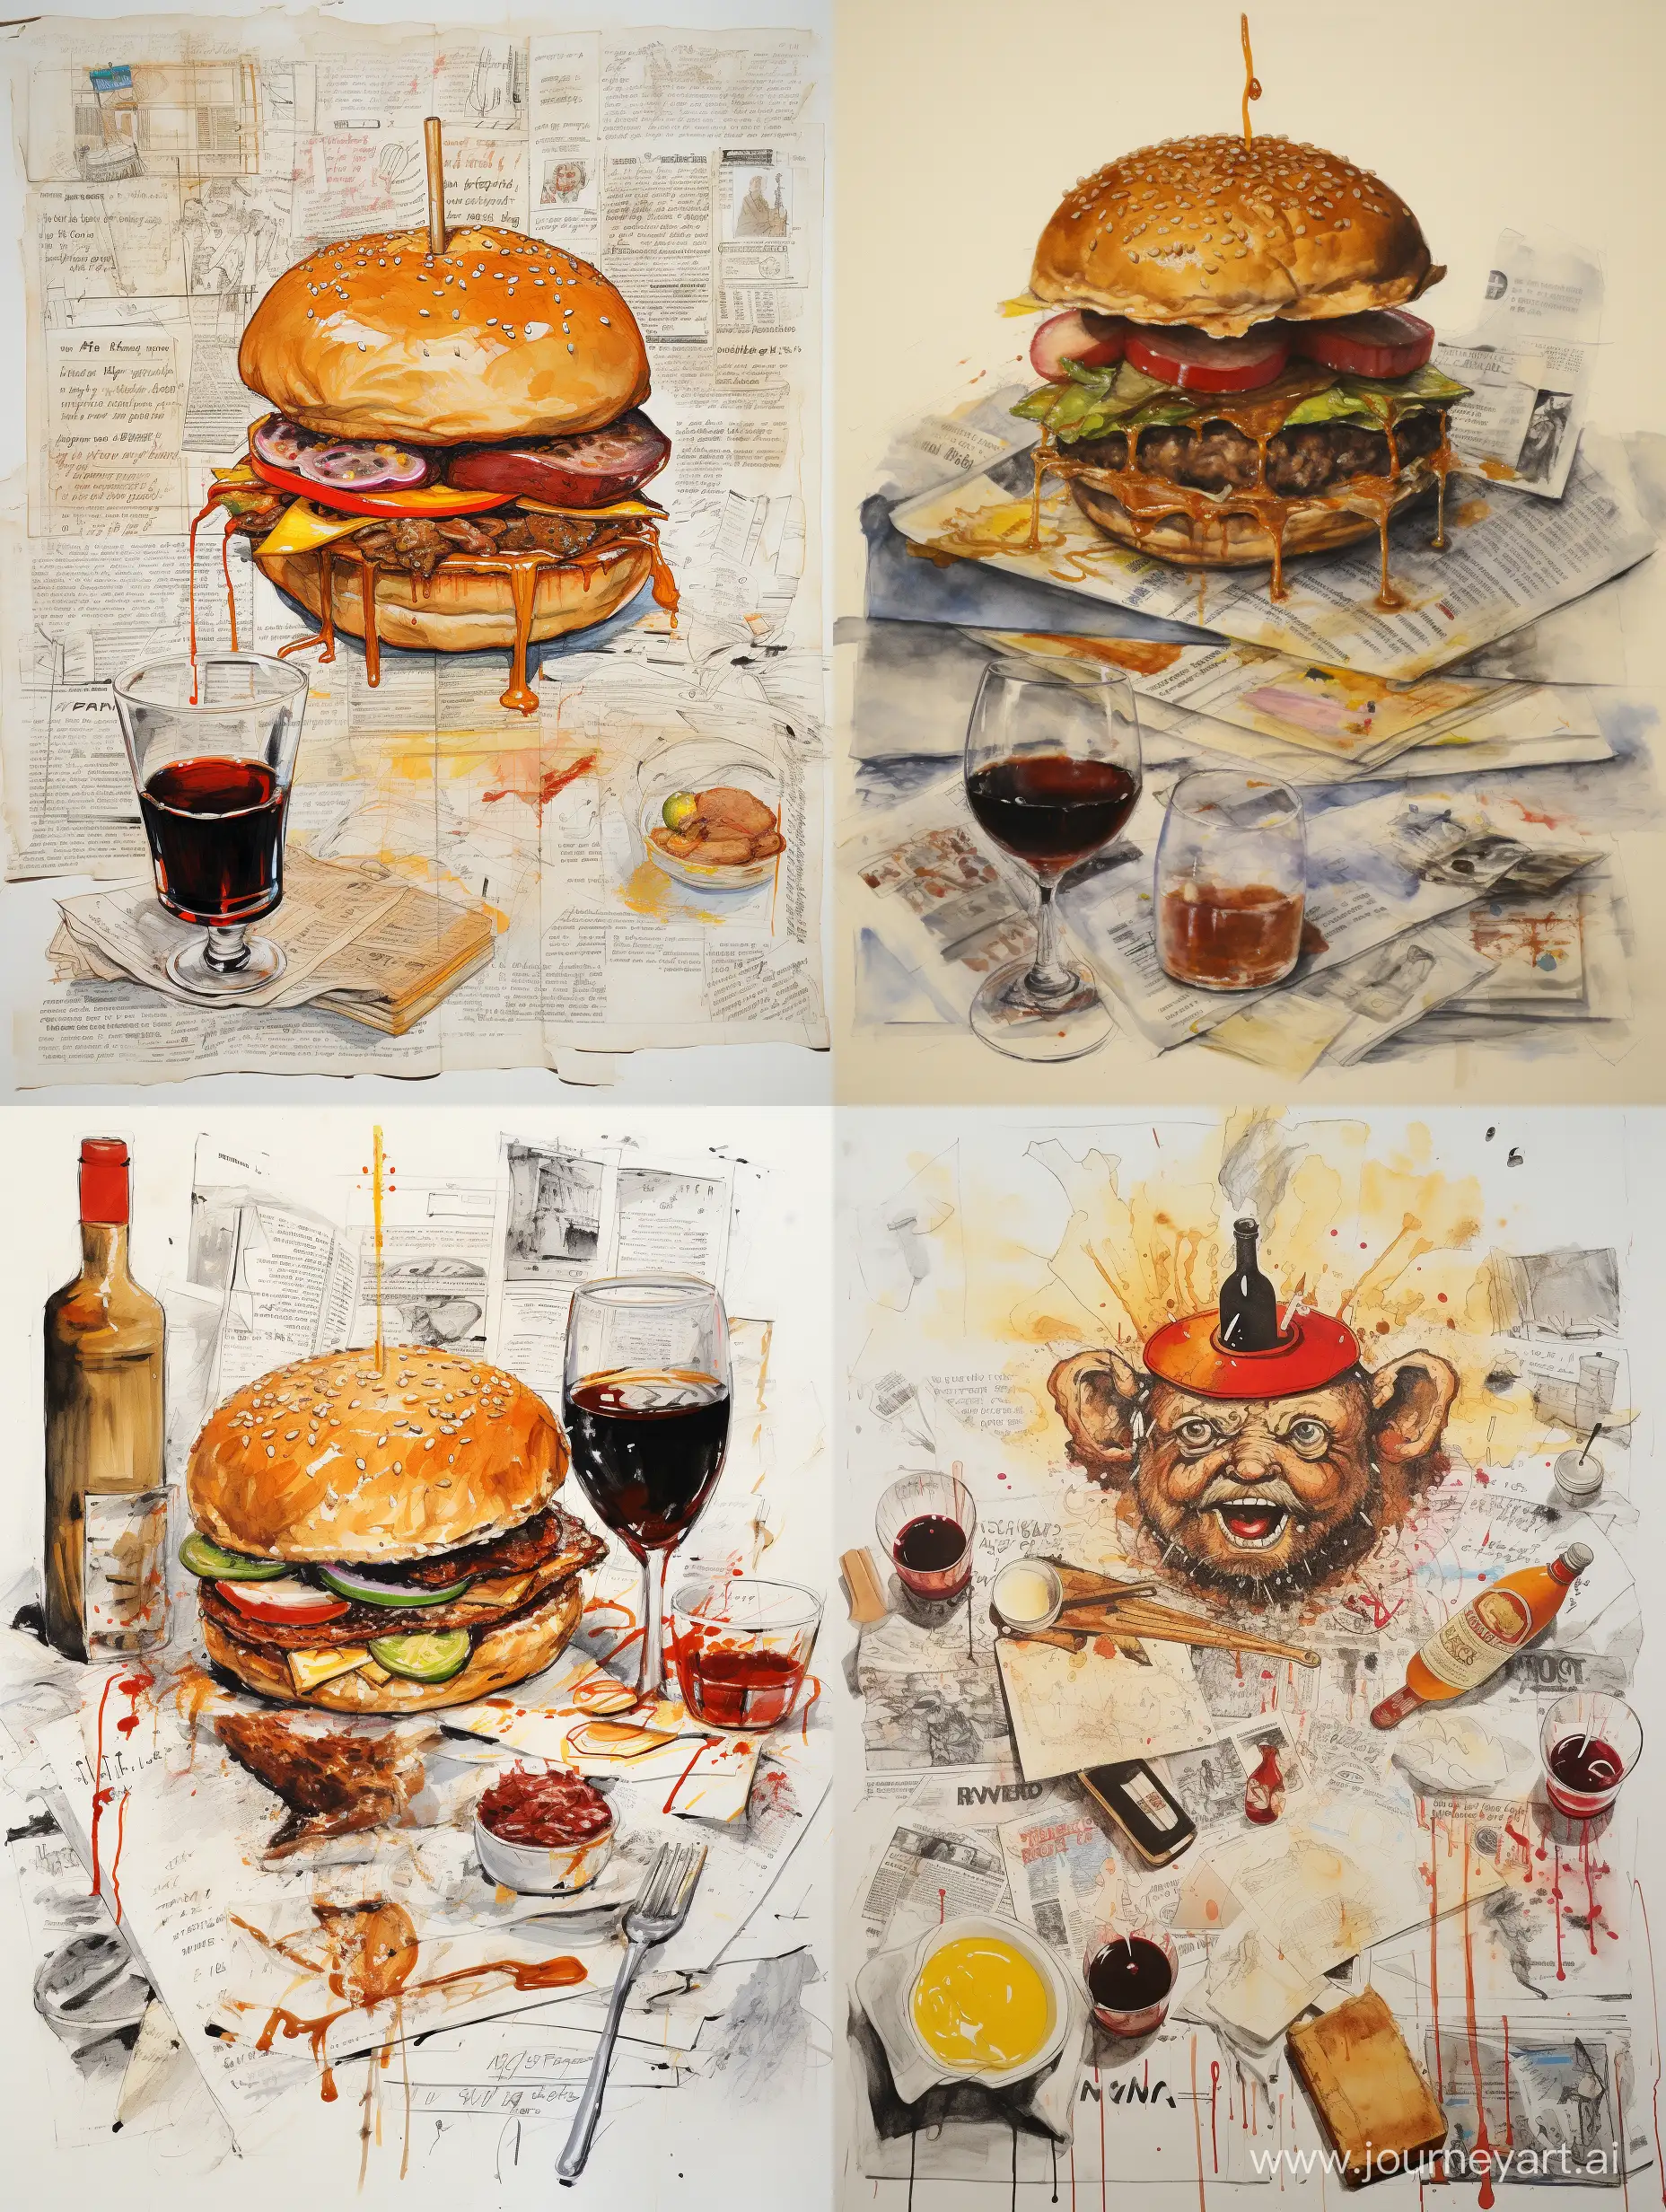 burger, fries on a side, ketchup and mustard smeared stains, cigarette butts, smoke,  square glass of whiskey with ice, everything rests on pages of manuscript, view from directly above, no background, ralph steadman's style